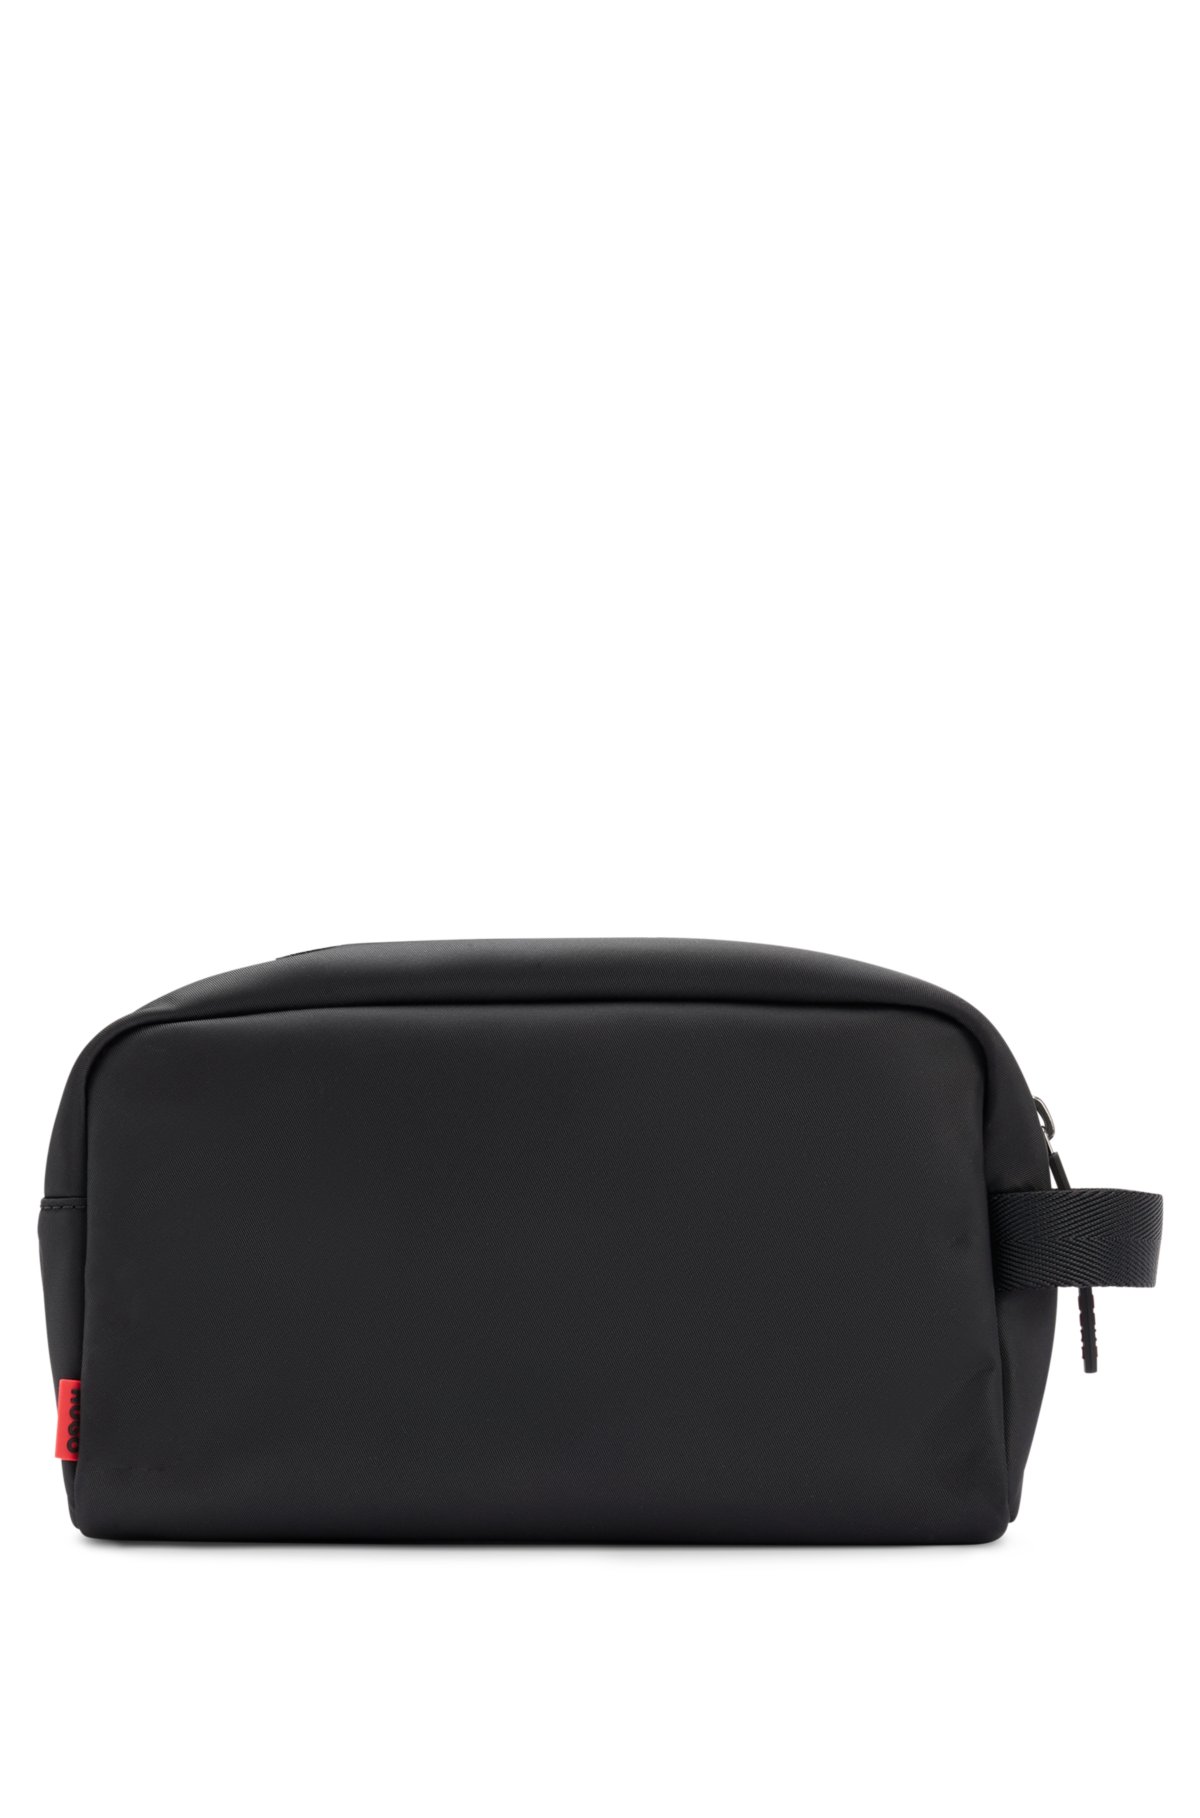 Structured-material washbag with red logo label, Black